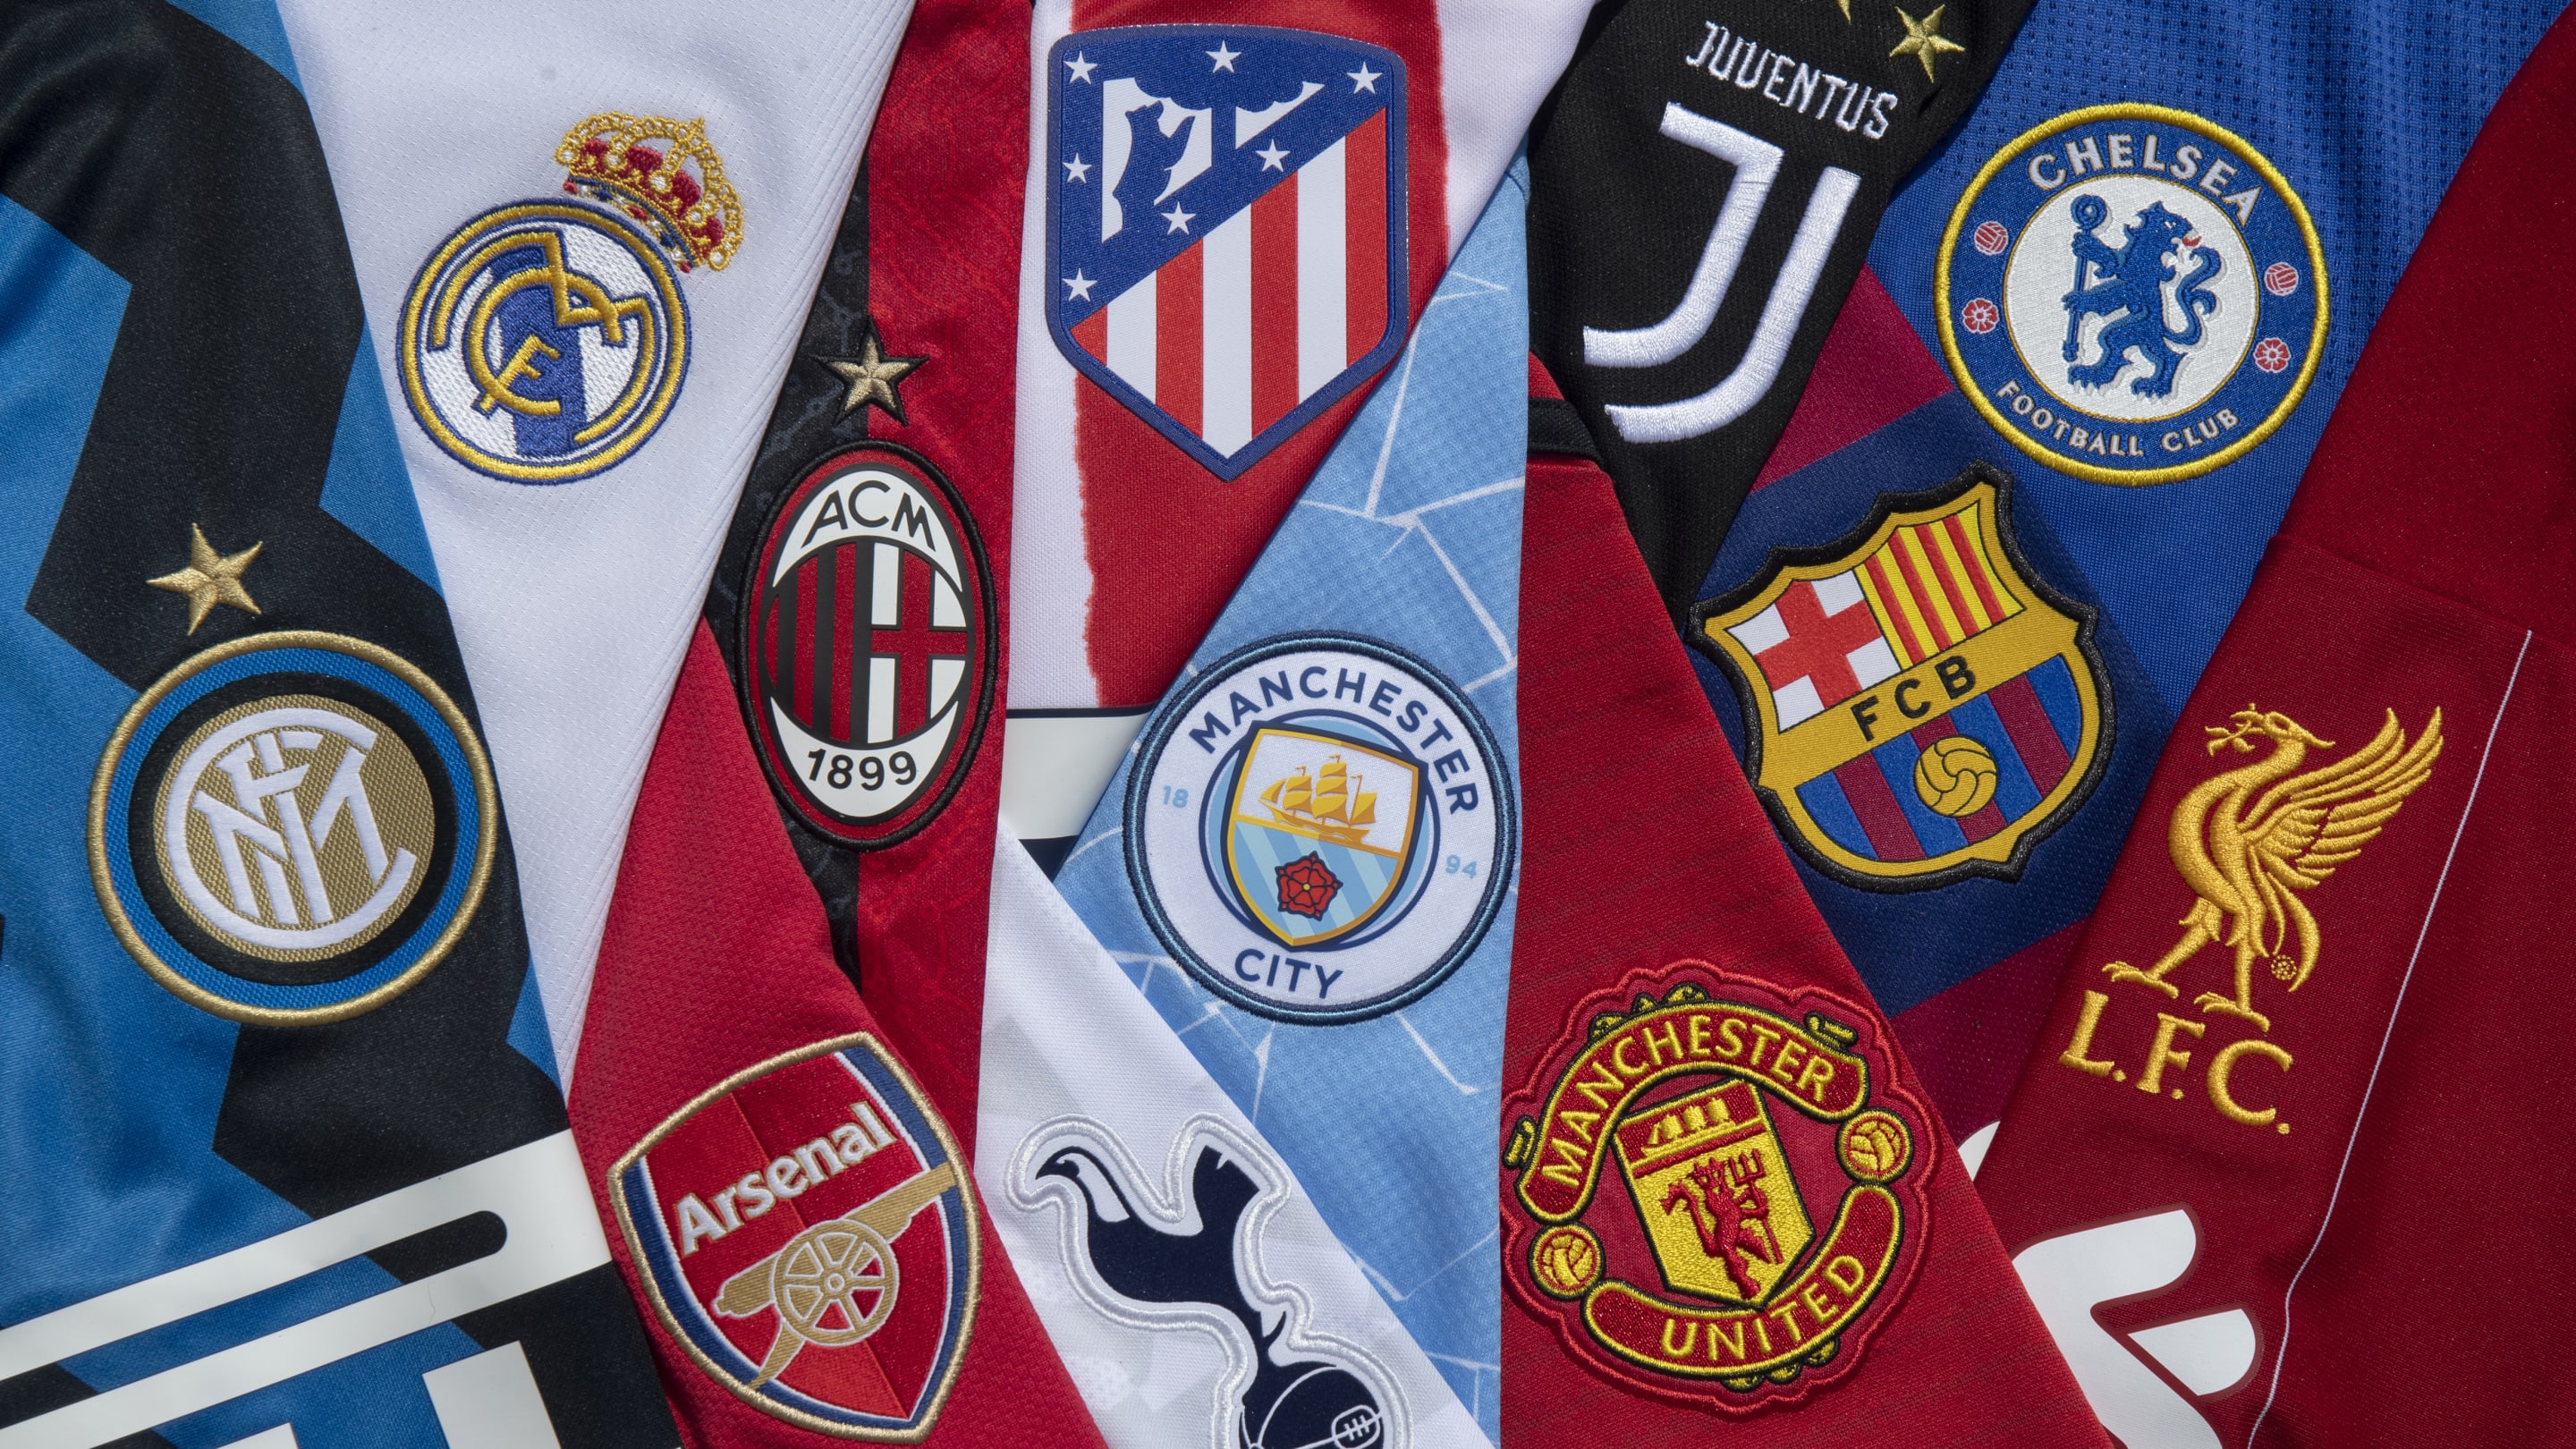 50 most valuable football clubs in the world - ranked